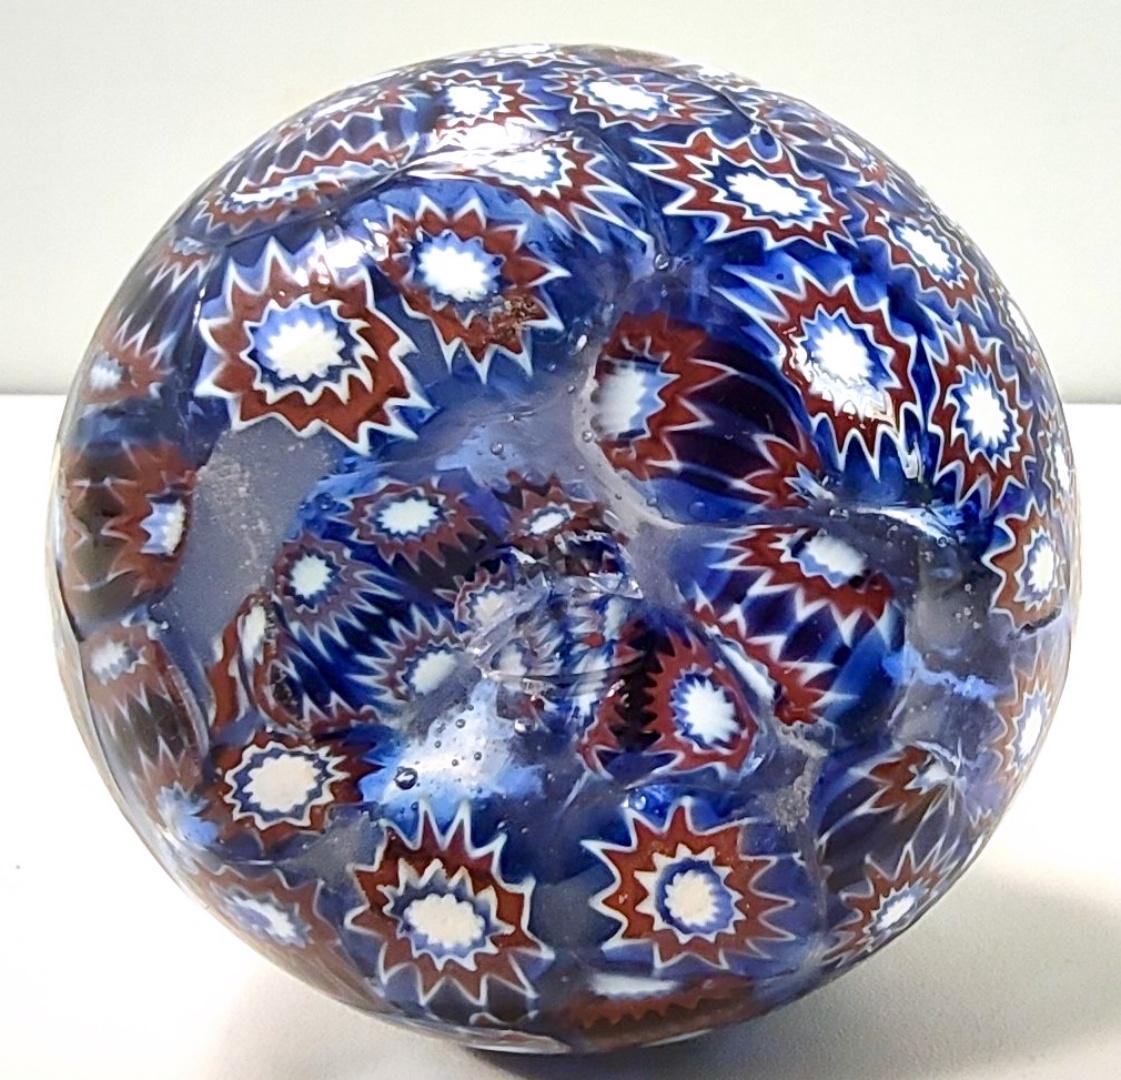 Vintage Blue Murano Glass Vase Ascribable to Fratelli Toso with Murrines, Italy For Sale 9